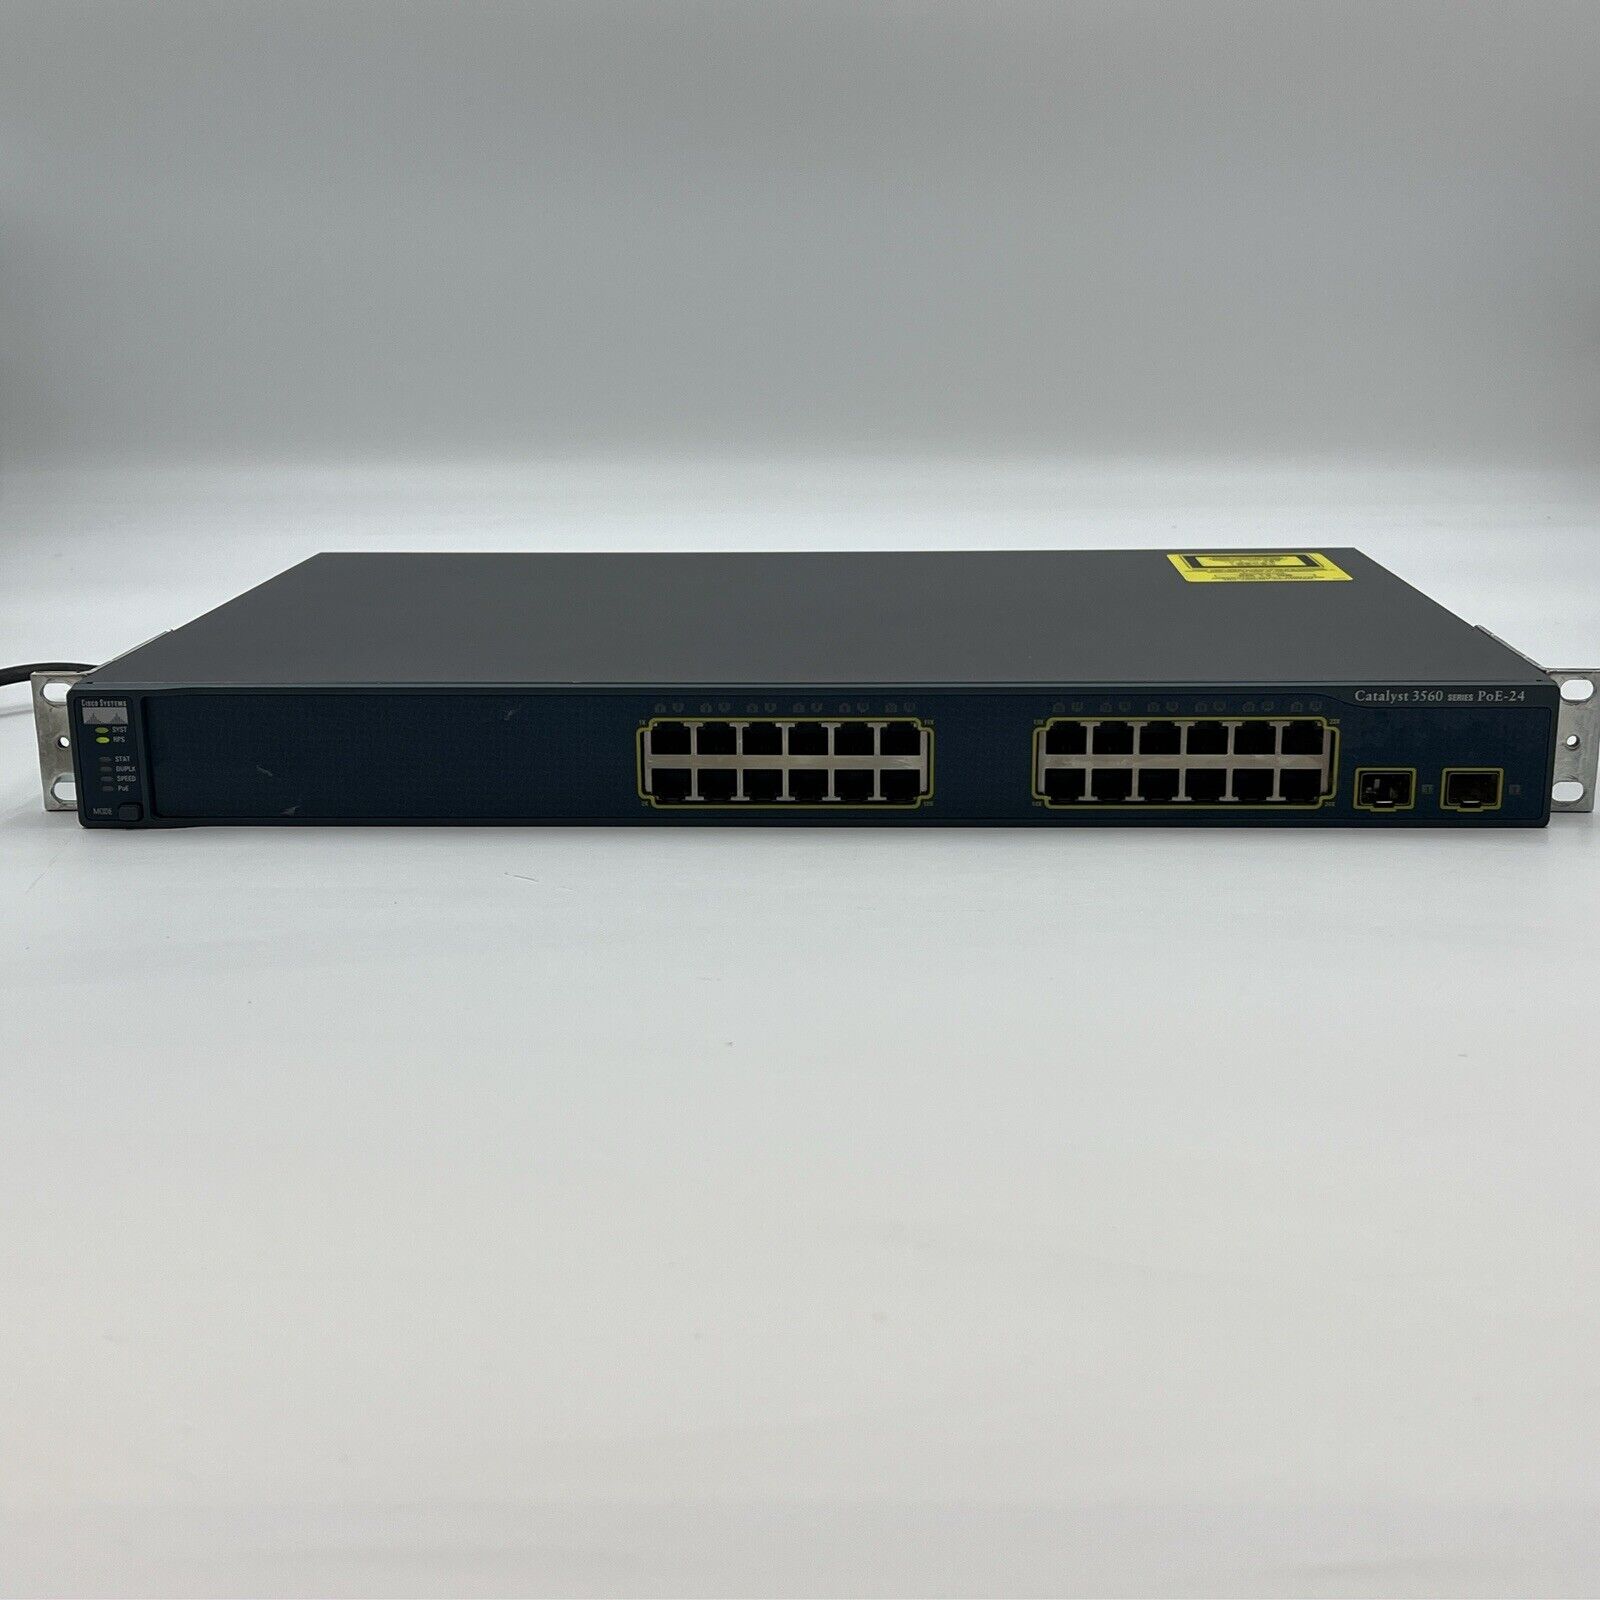 Cisco WS-C3560-24PS-S Catalyst 24-Port 10/100 Fast Ethernet Network Switch